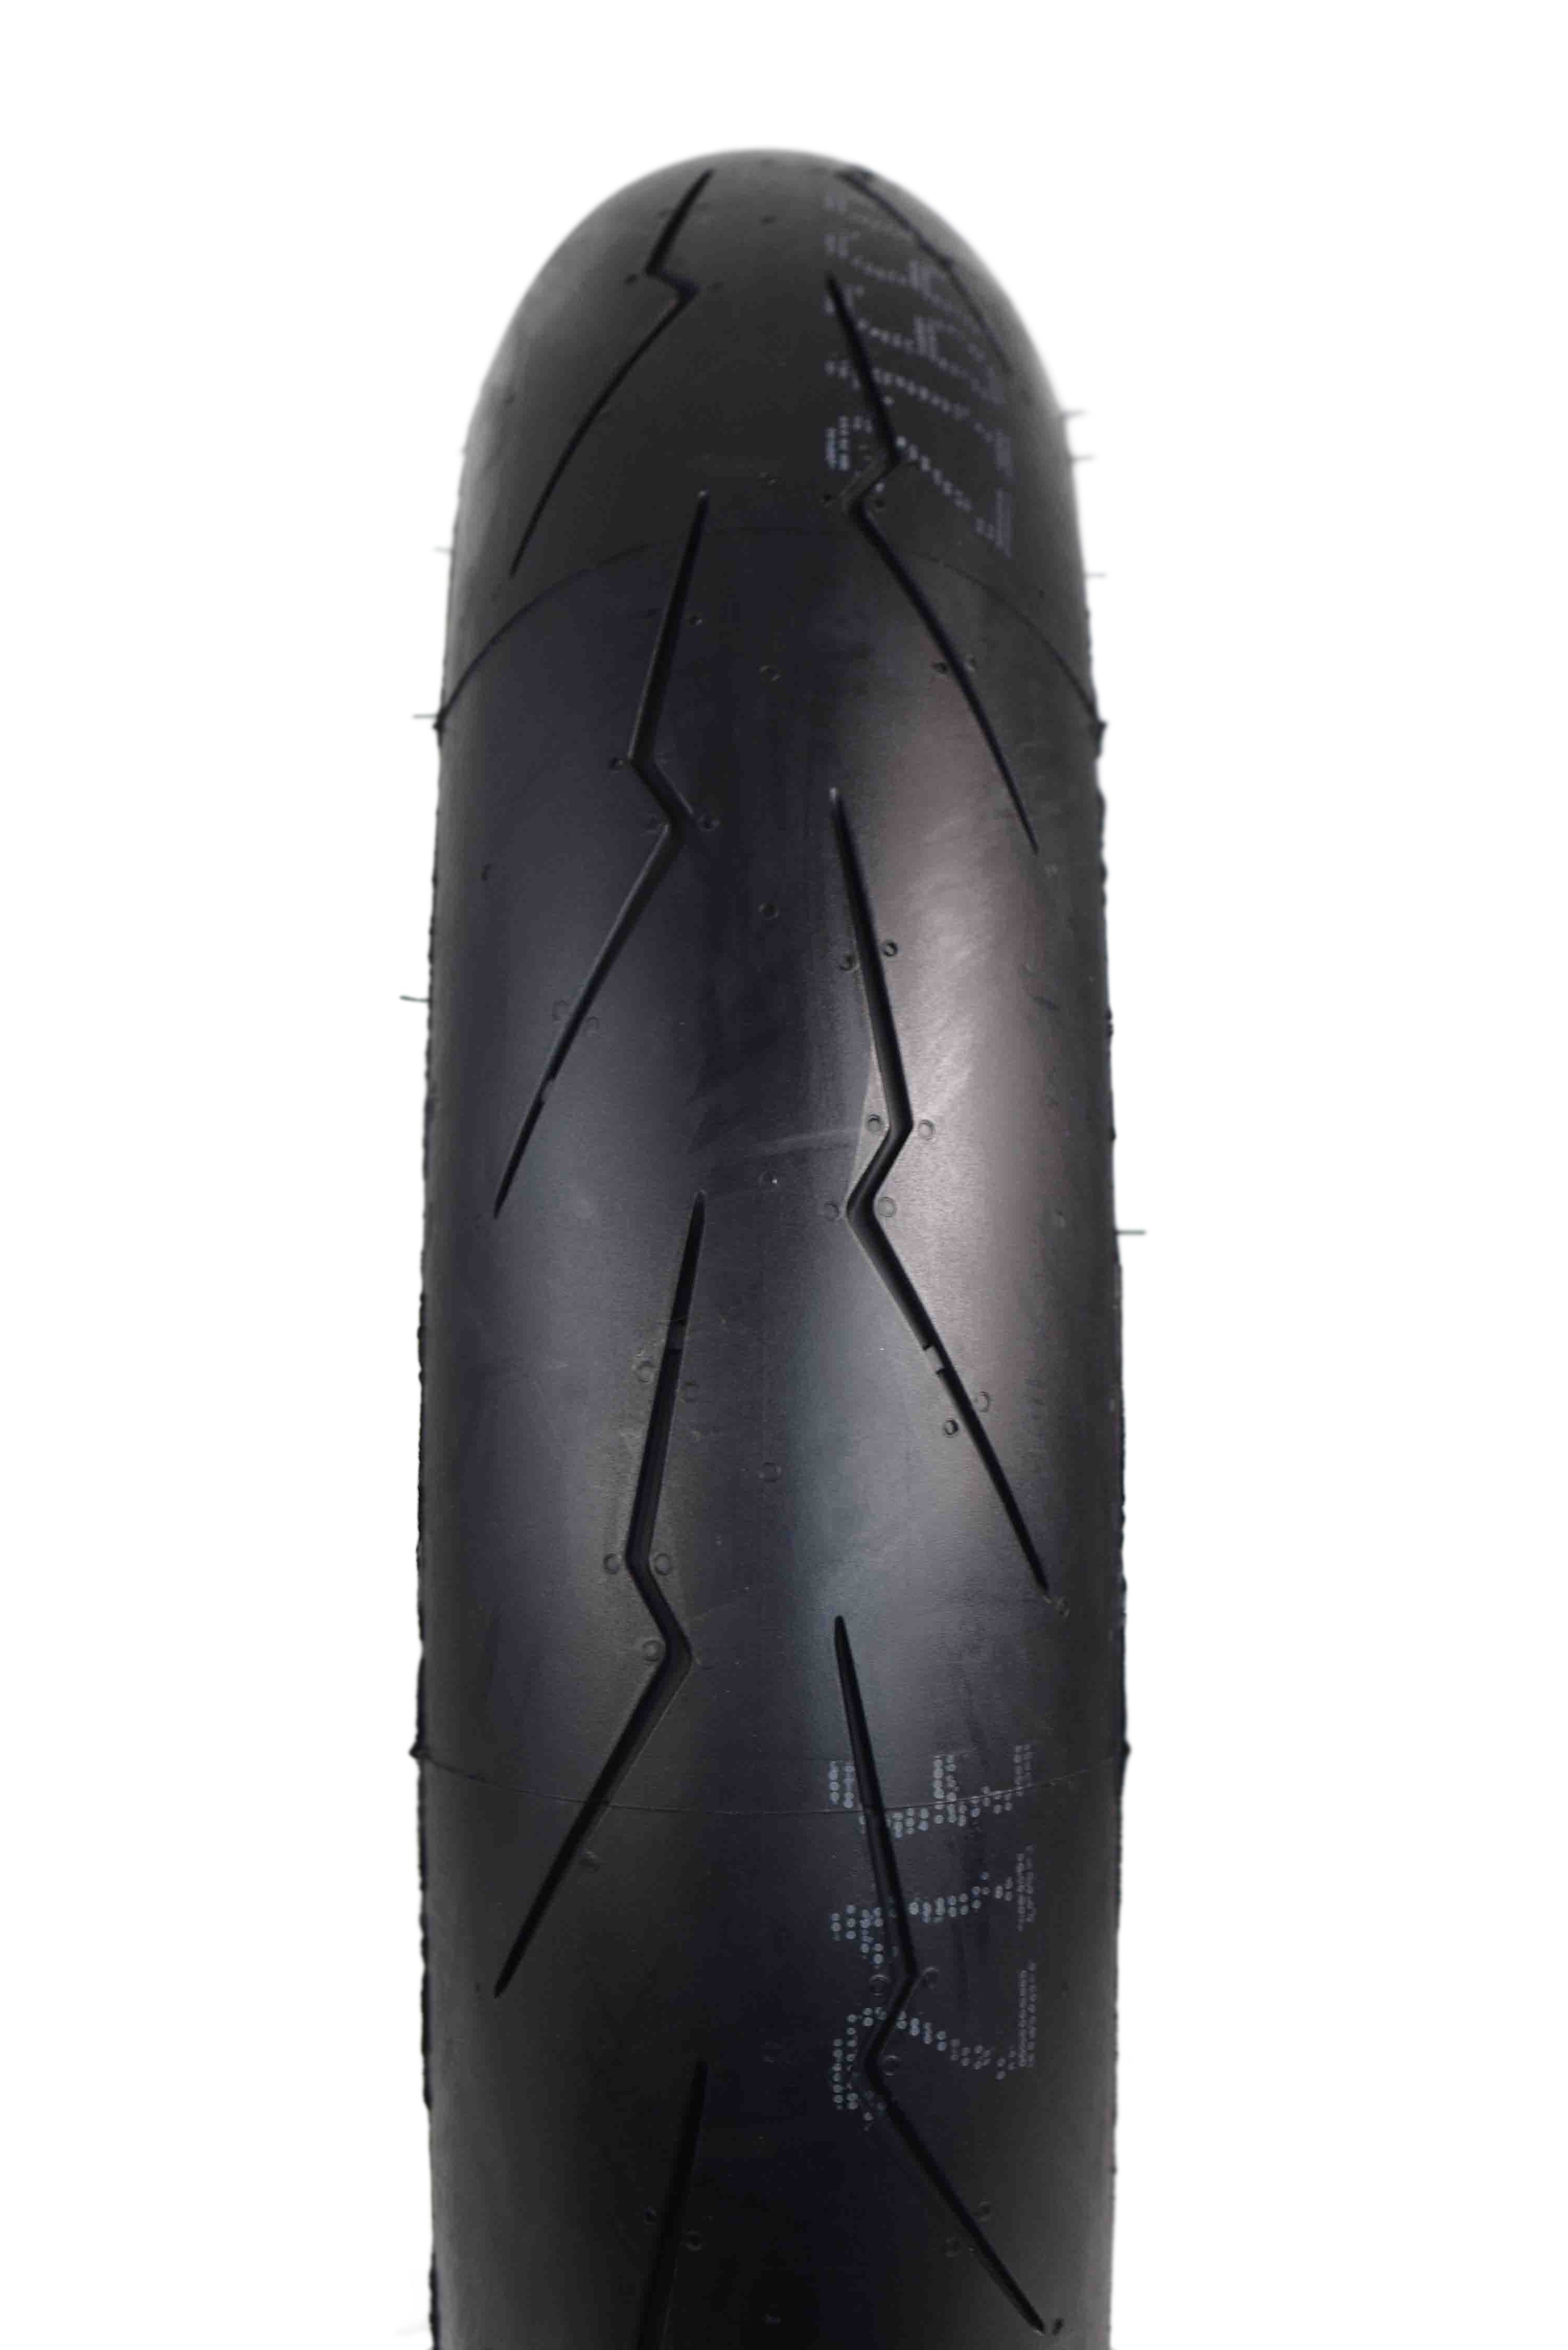 Pirelli-Tire-120-70ZR17-SUPER-CORSA-V2-Radial-Motorcycle-Front-Tire-120-70-17-image-4